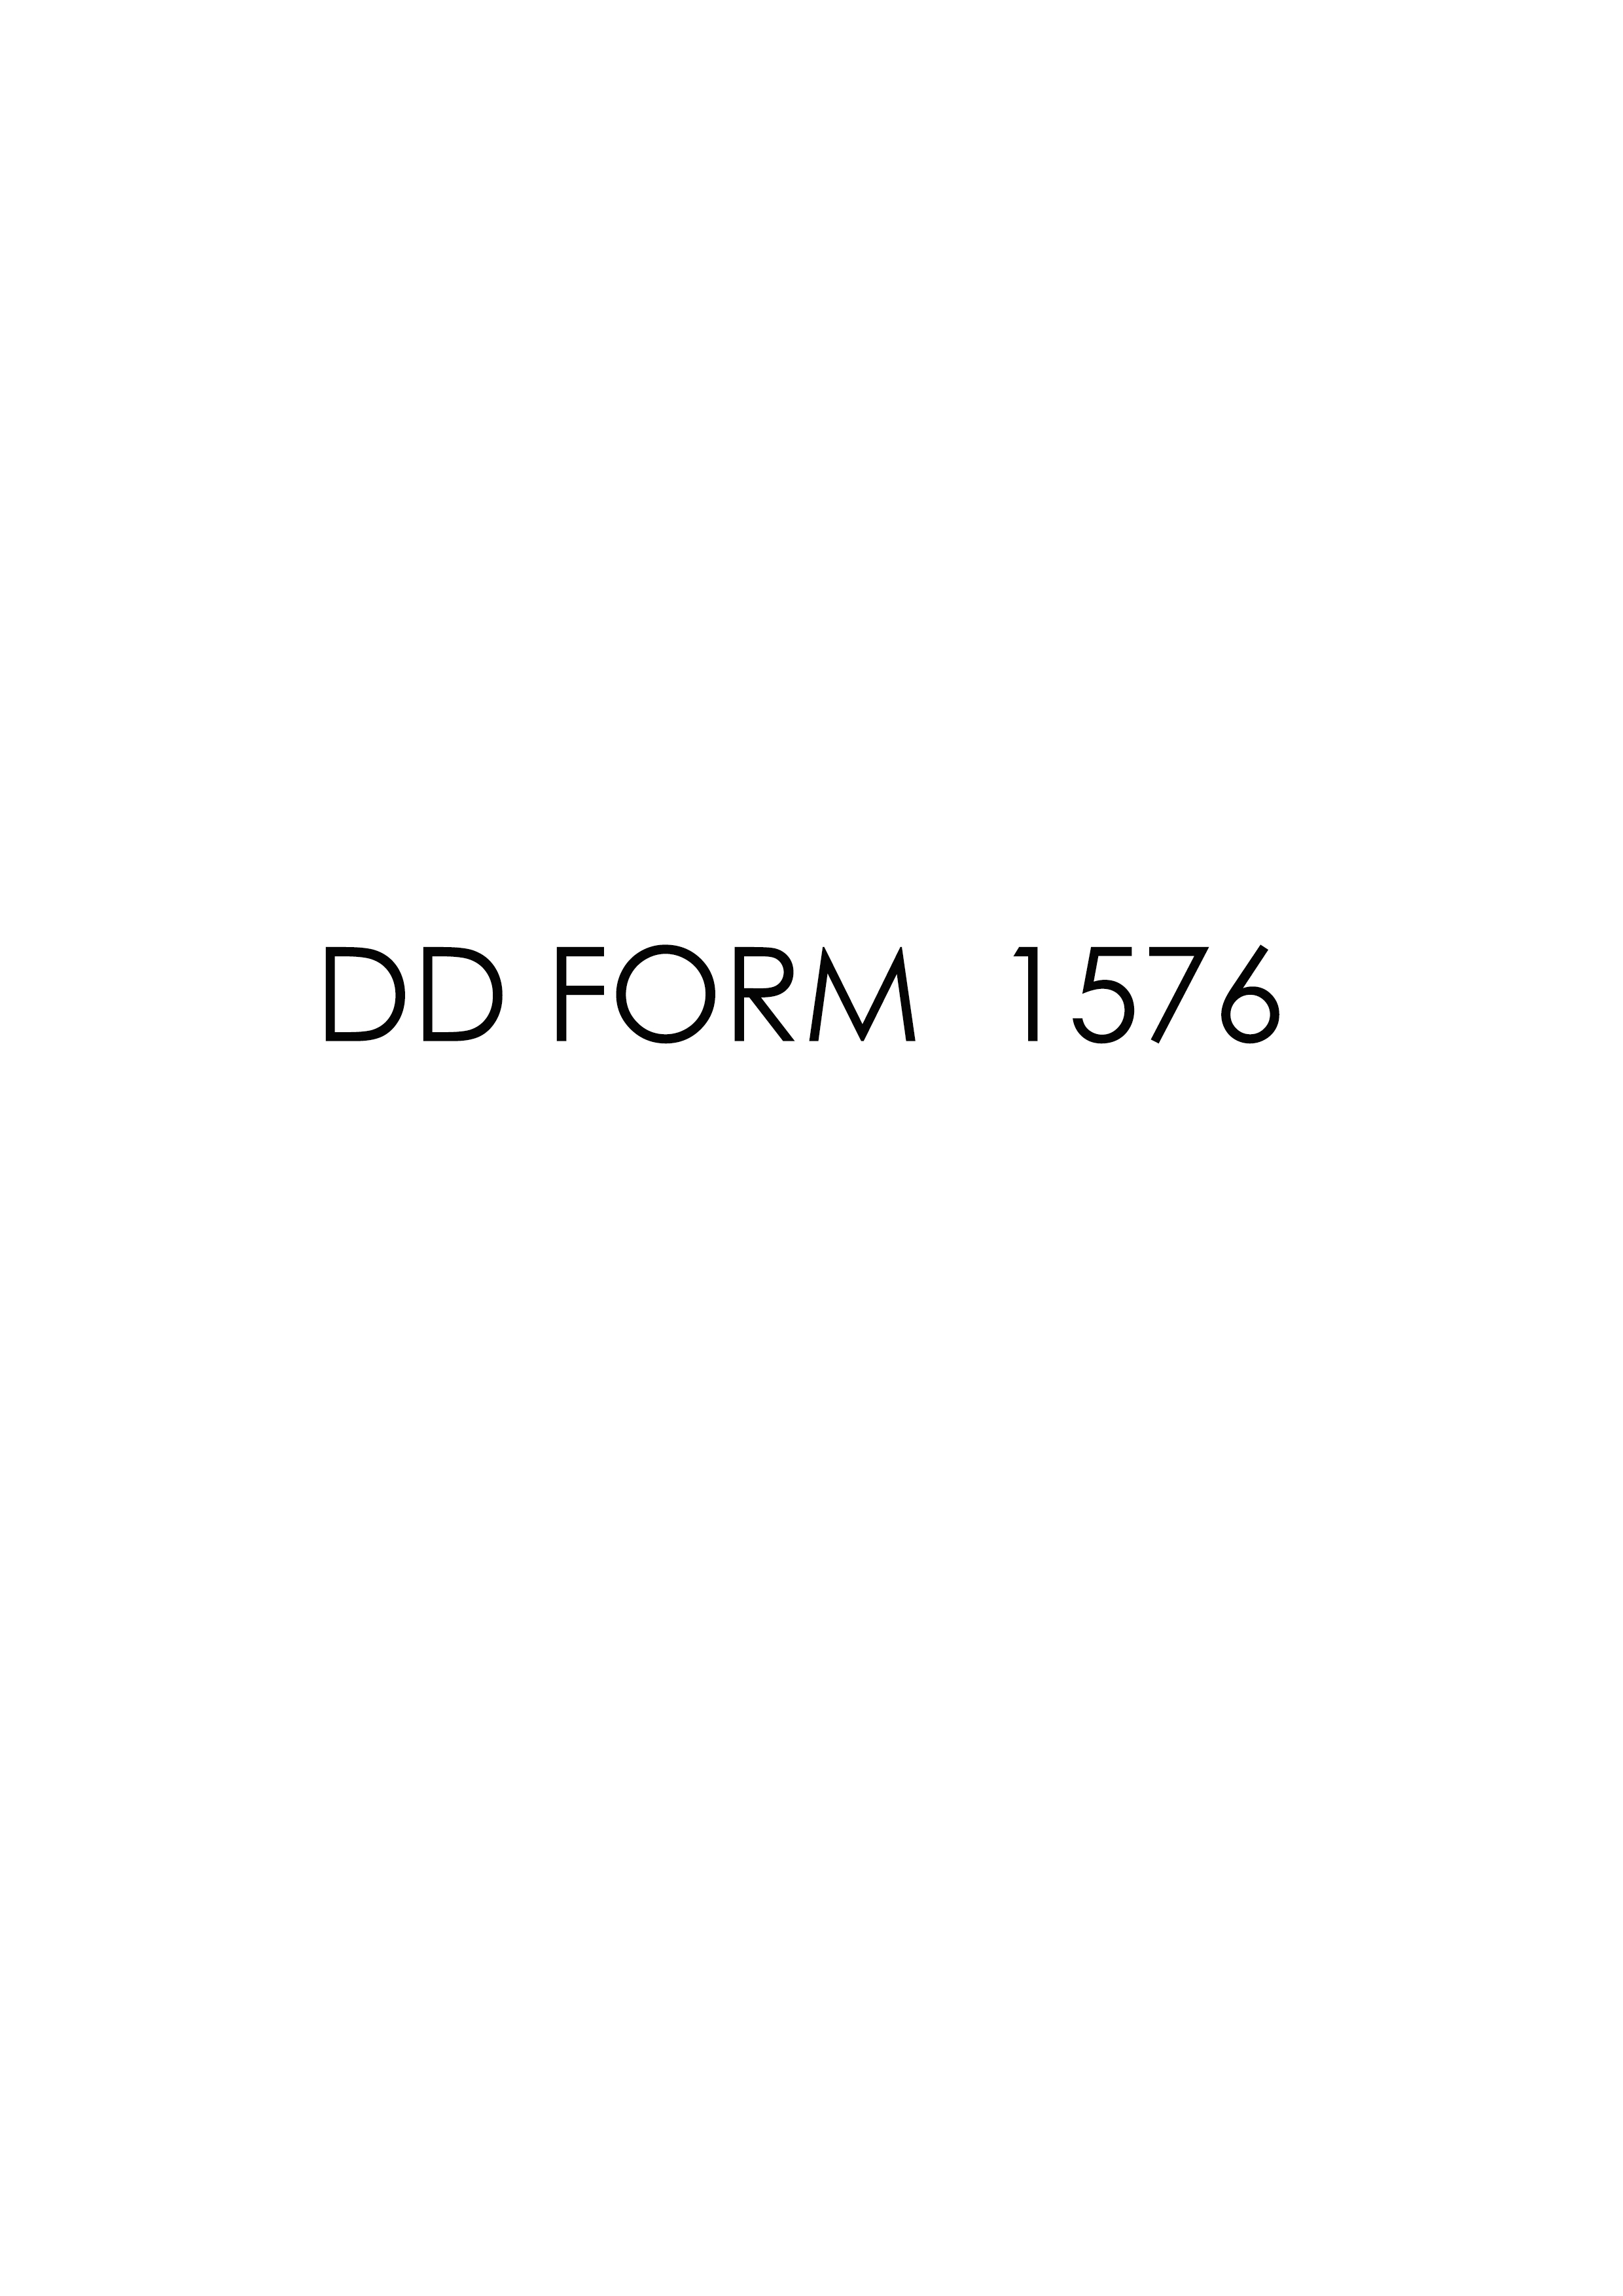 Download Fillable dd Form 1576